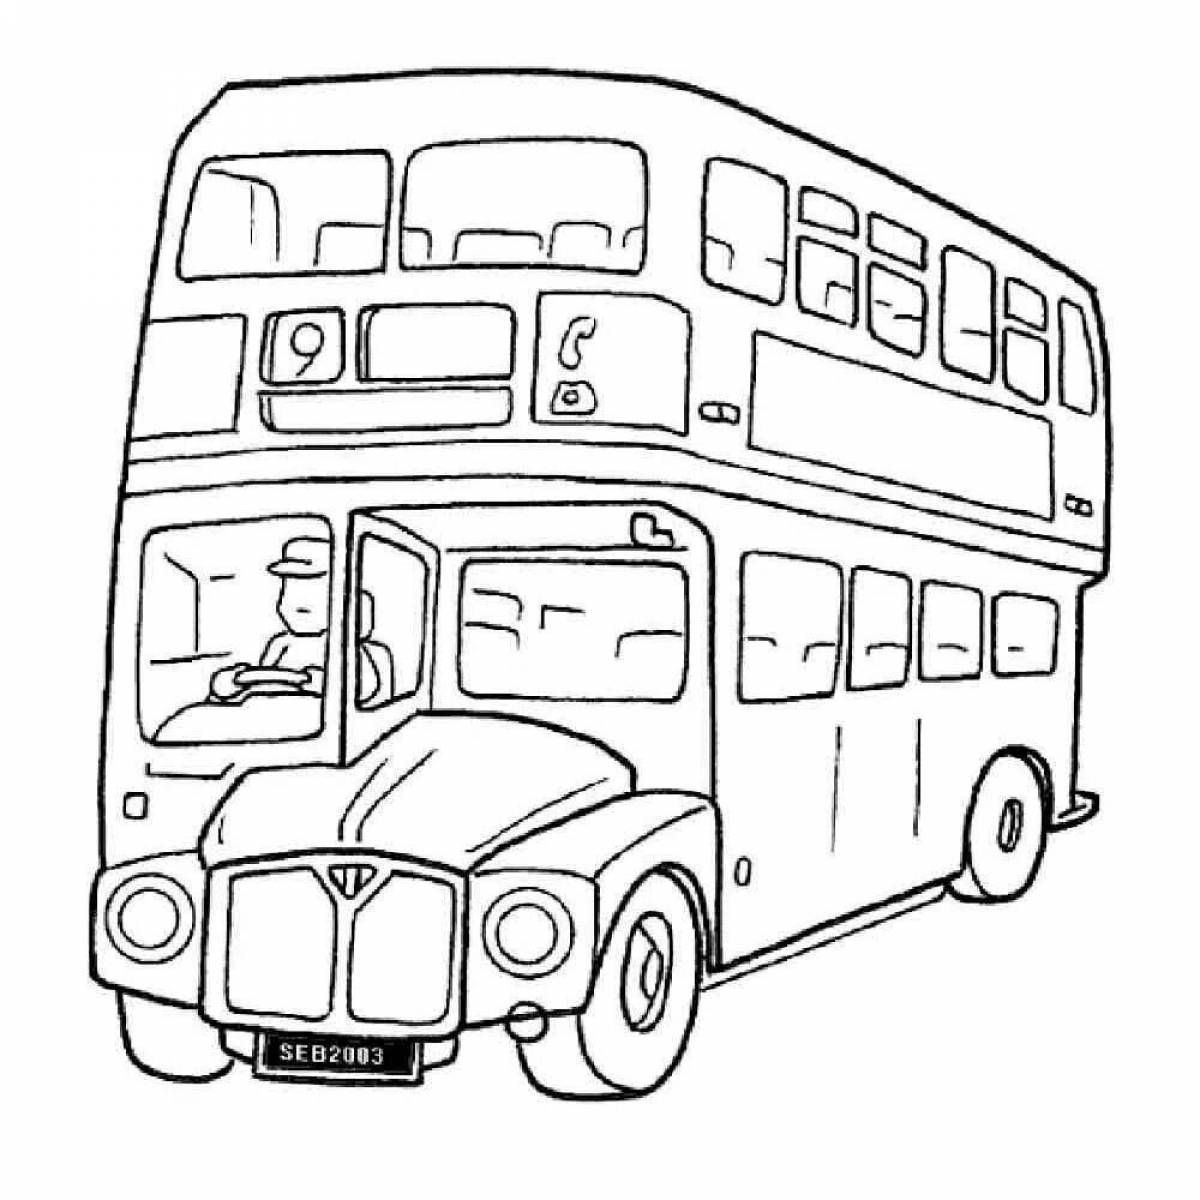 Coloring page inviting passenger transport